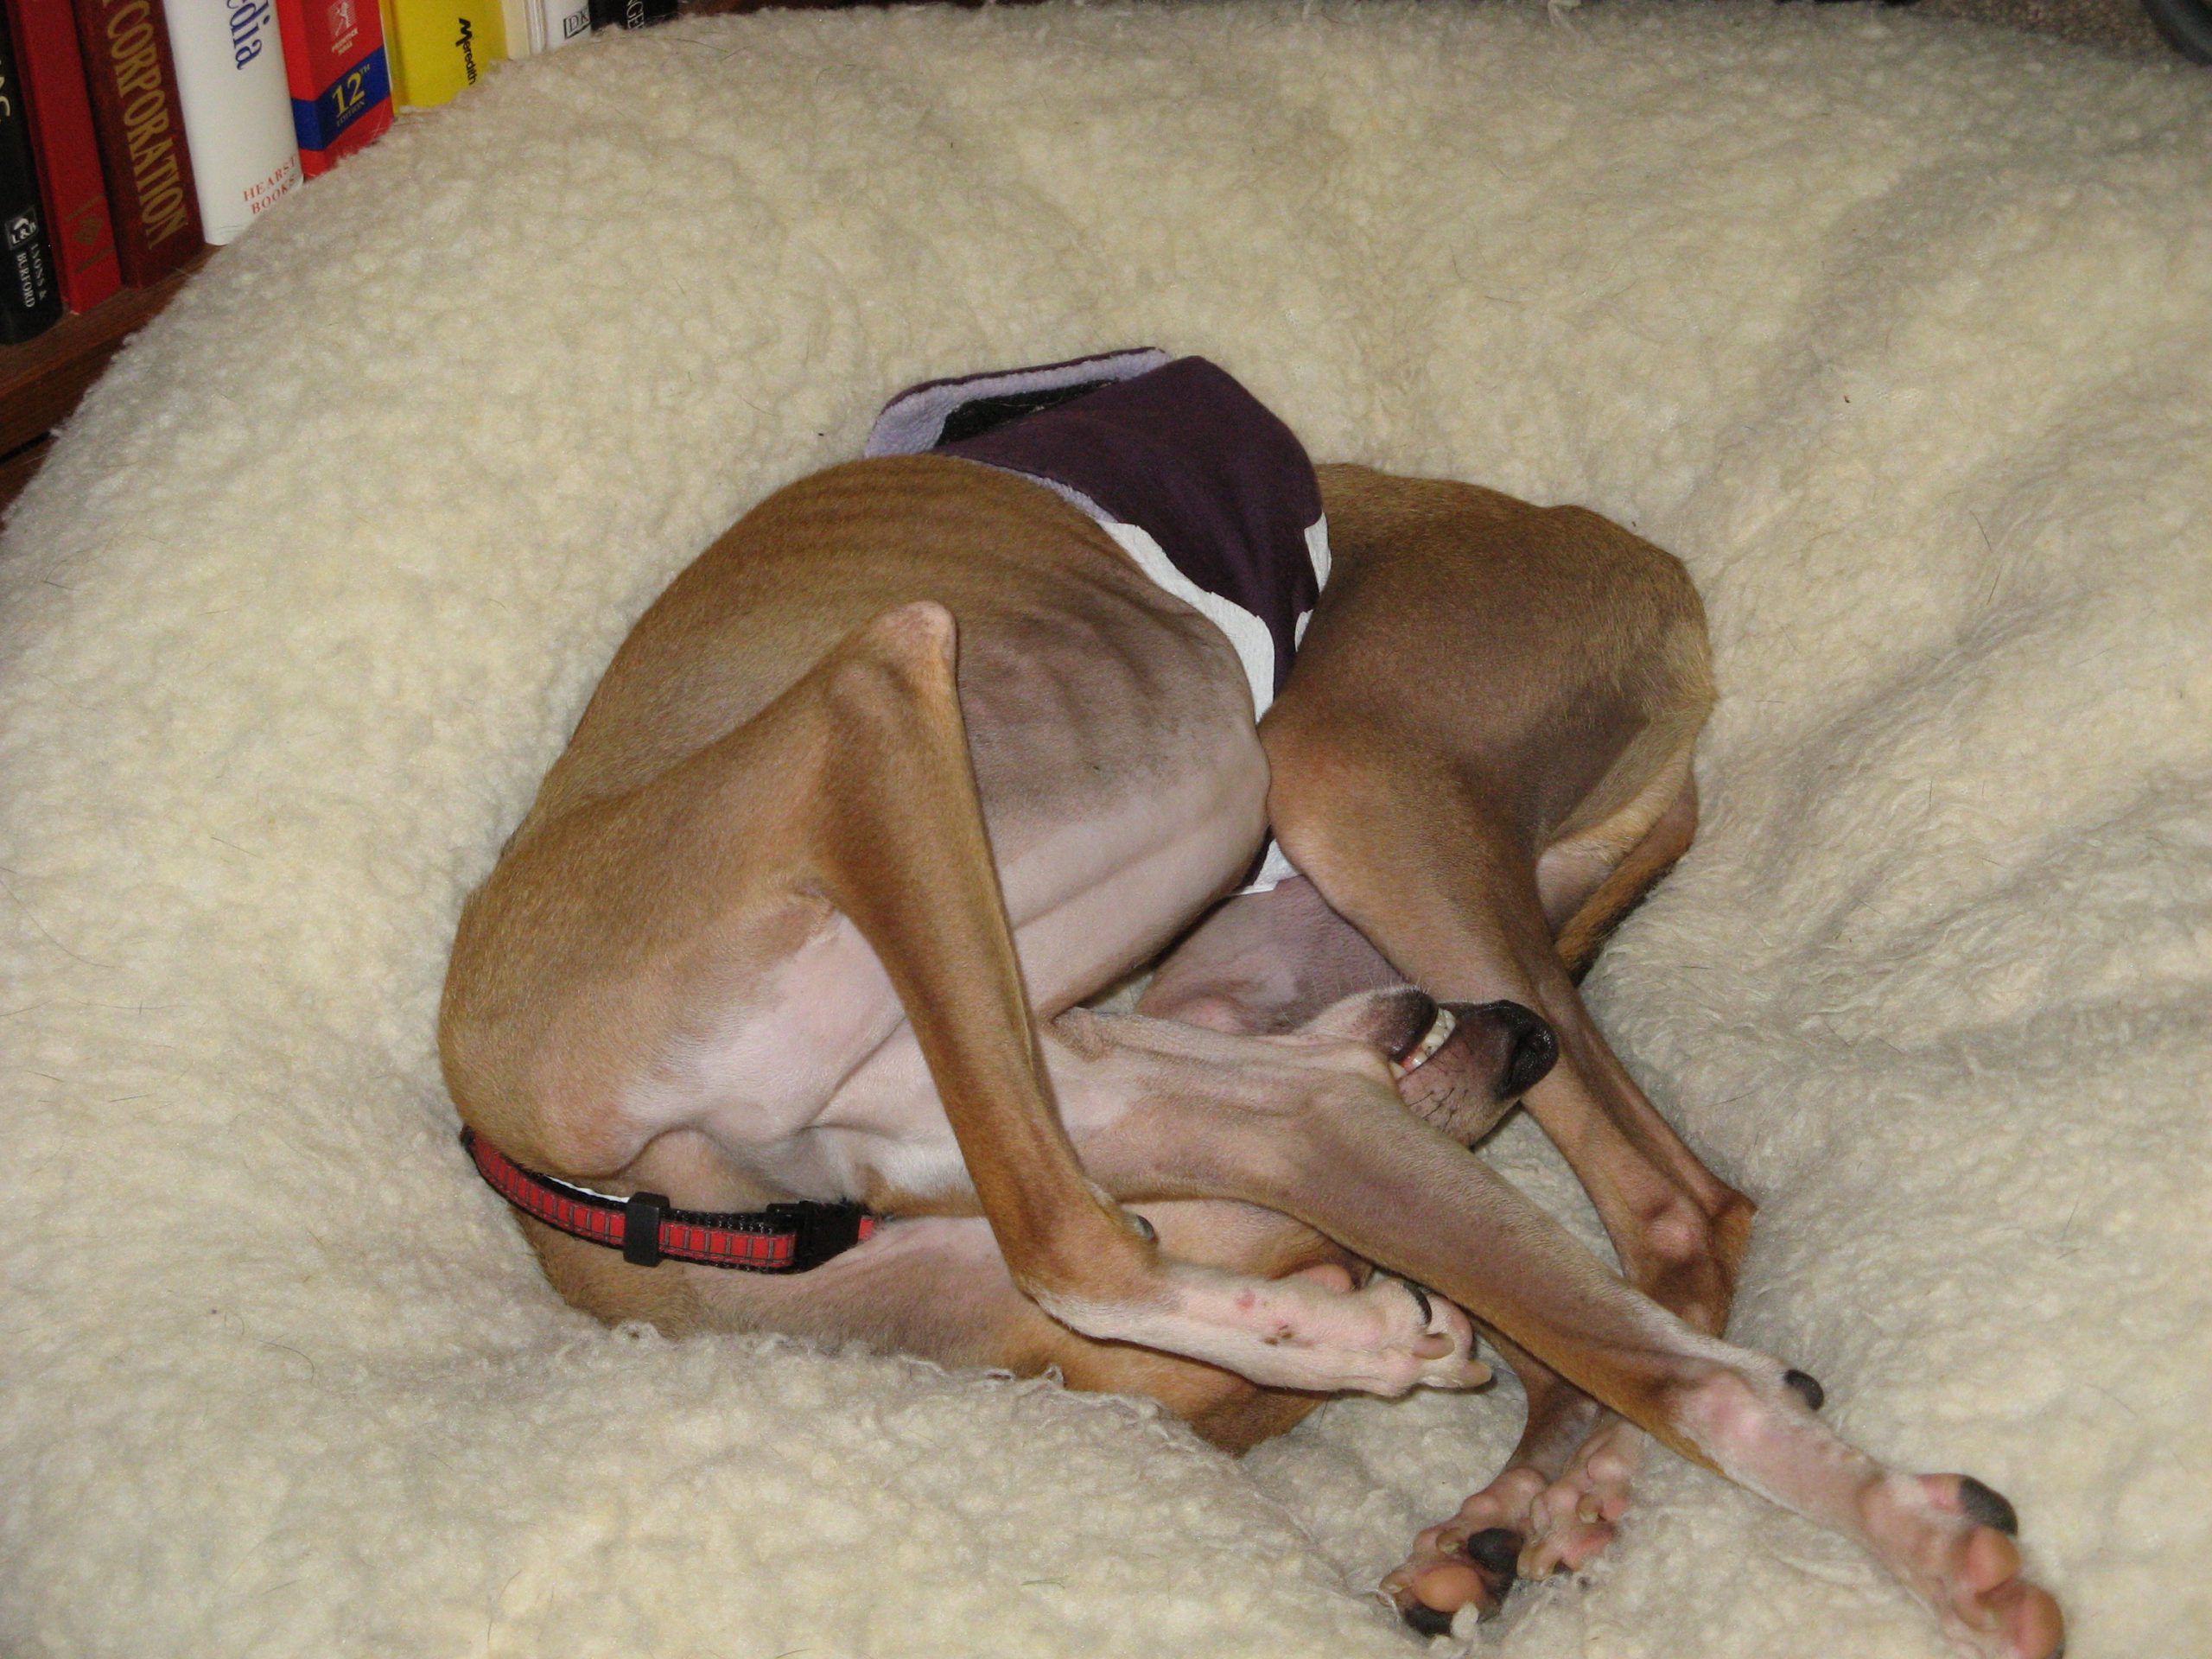 Italian Greyhound in a dog bed with belly band (diaper) around his waist